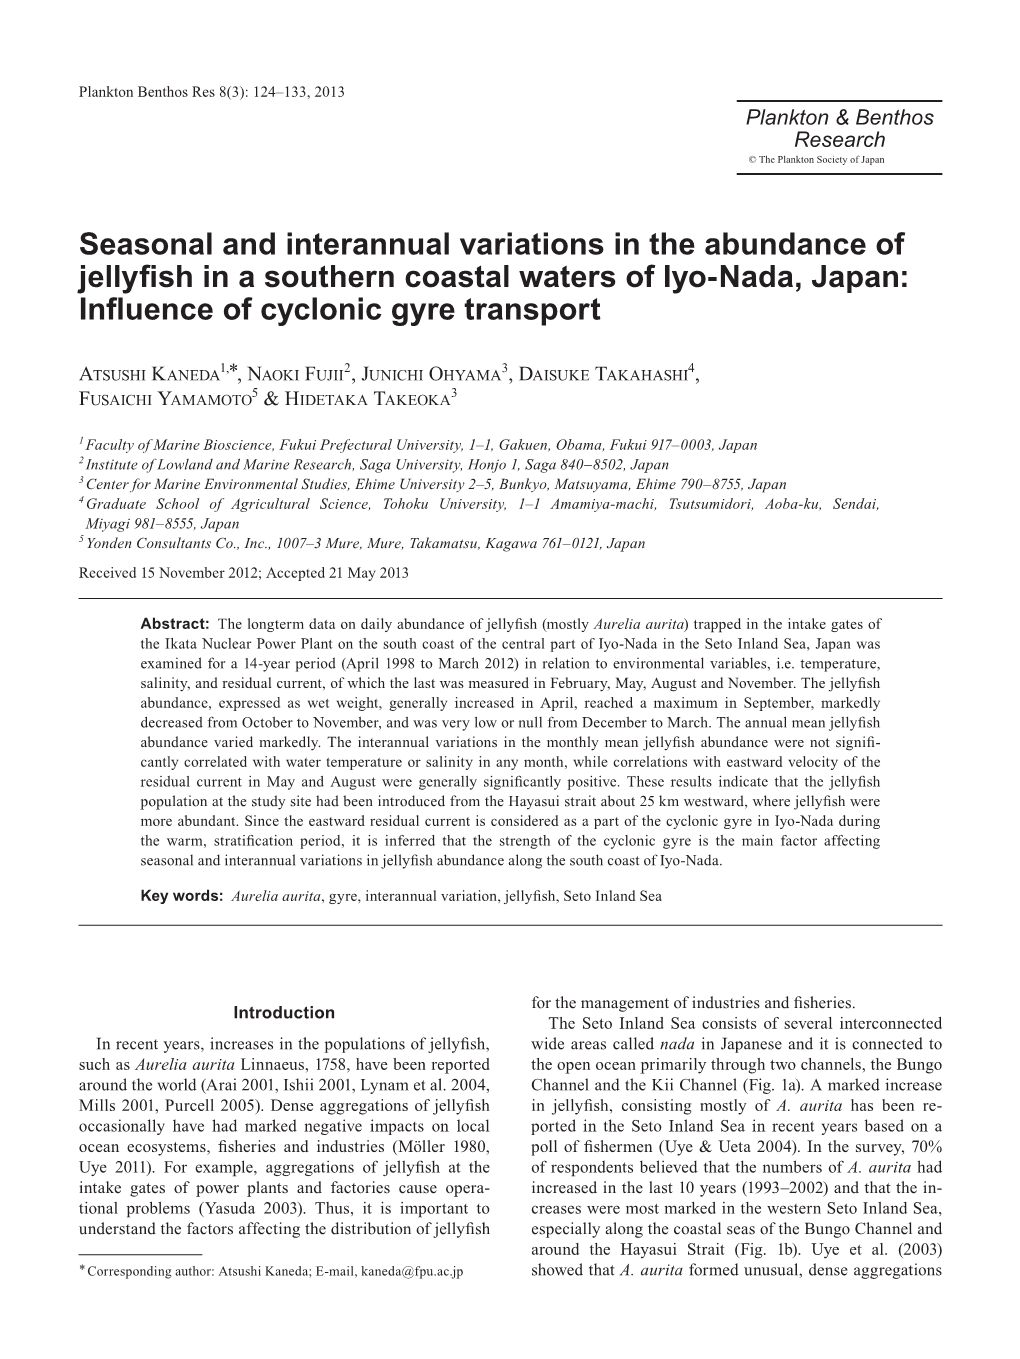 Seasonal and Interannual Variations in the Abundance of Jellyfish in A